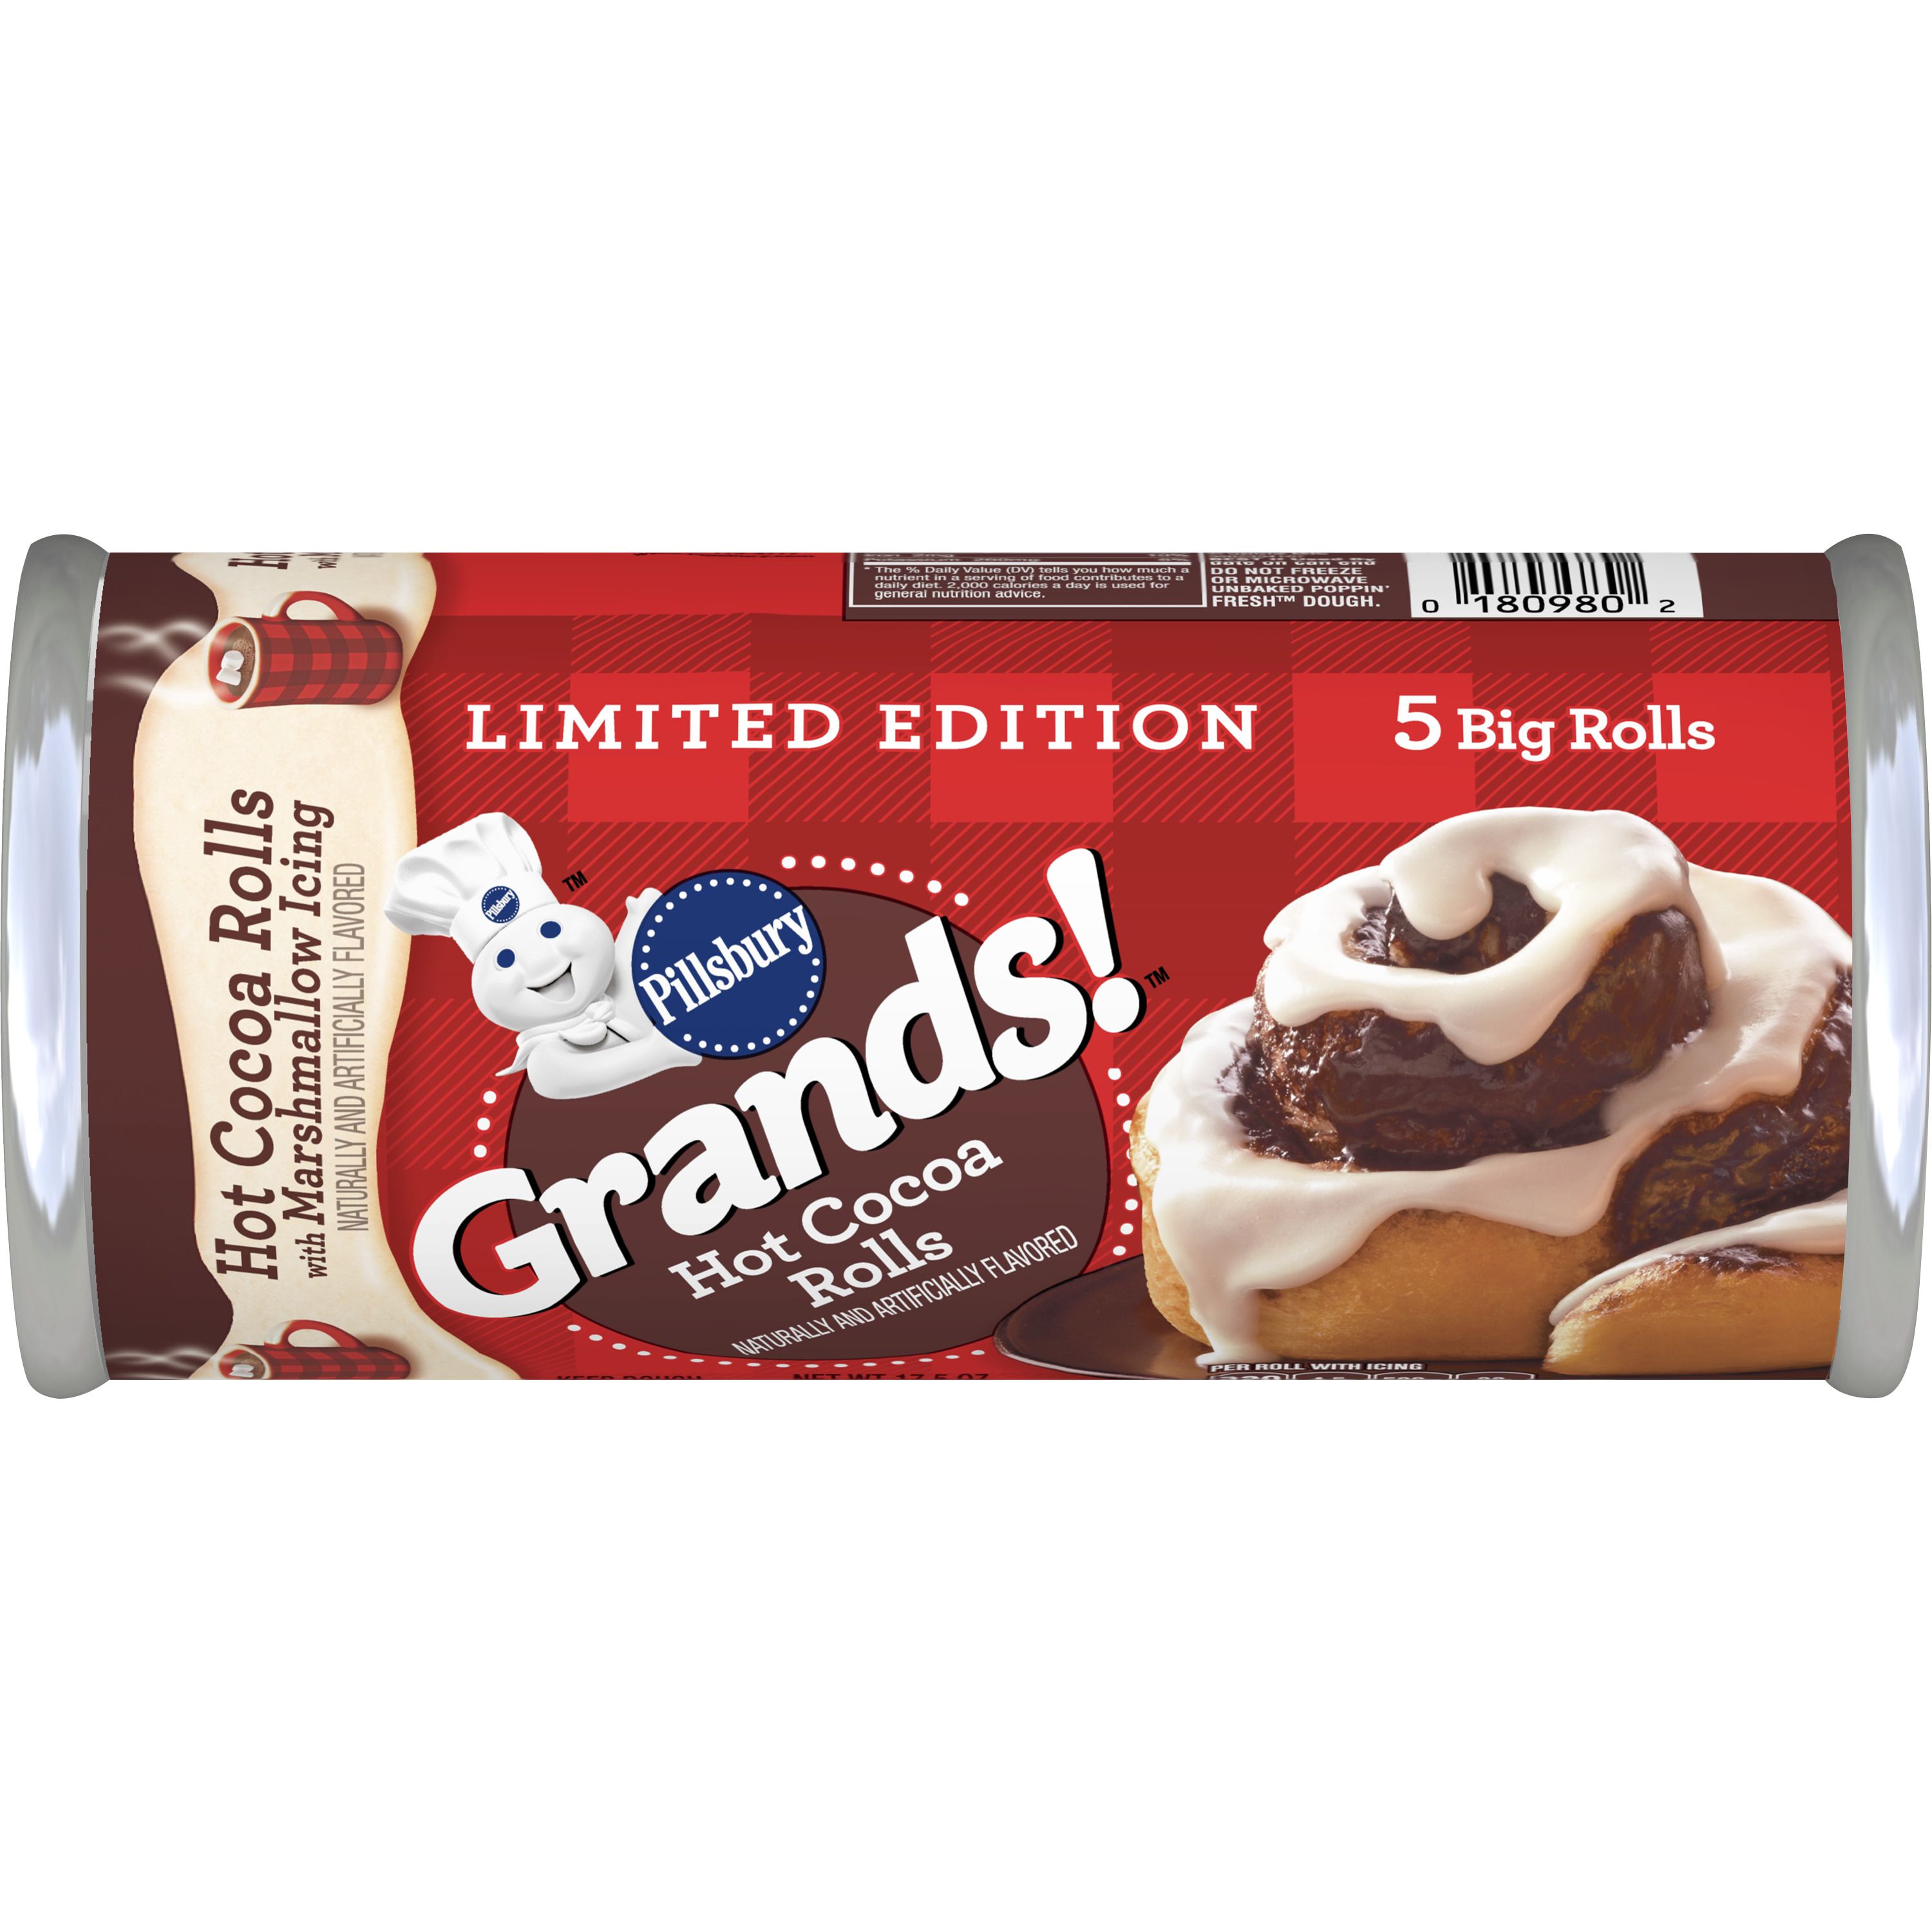 Limited Edition Pillsbury Grands! Hot Cocoa Rolls with Marshmallow Icing - Front